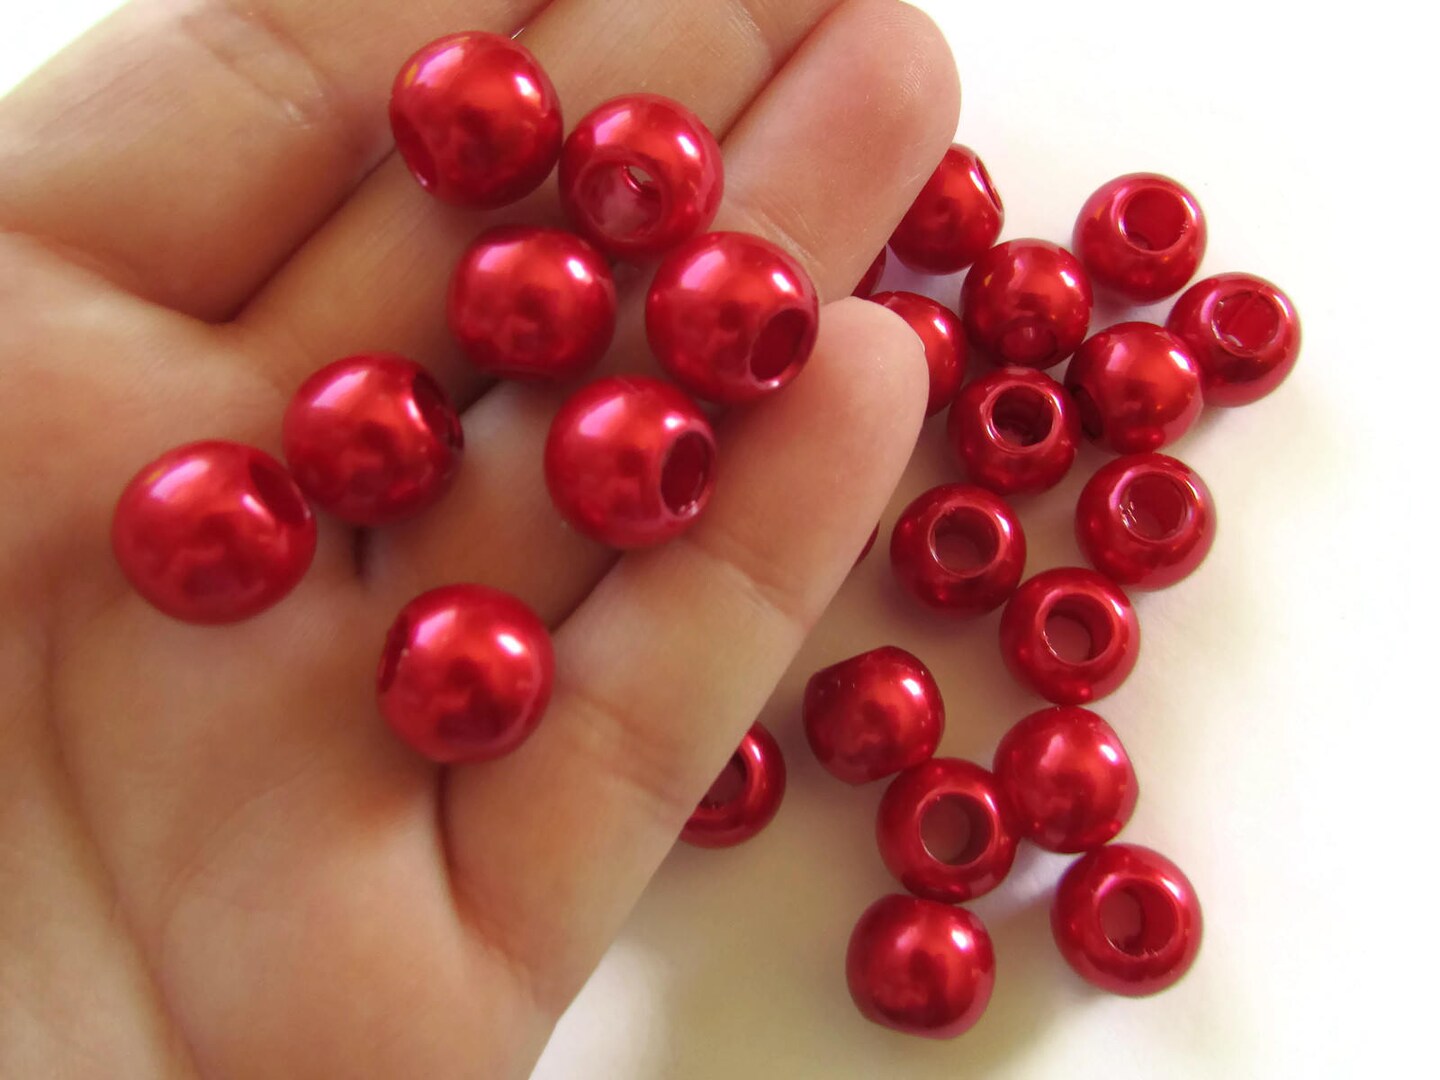 40 12mm Large Hole Pearls Round Red Pearl Beads Plastic Pearl Beads bK3